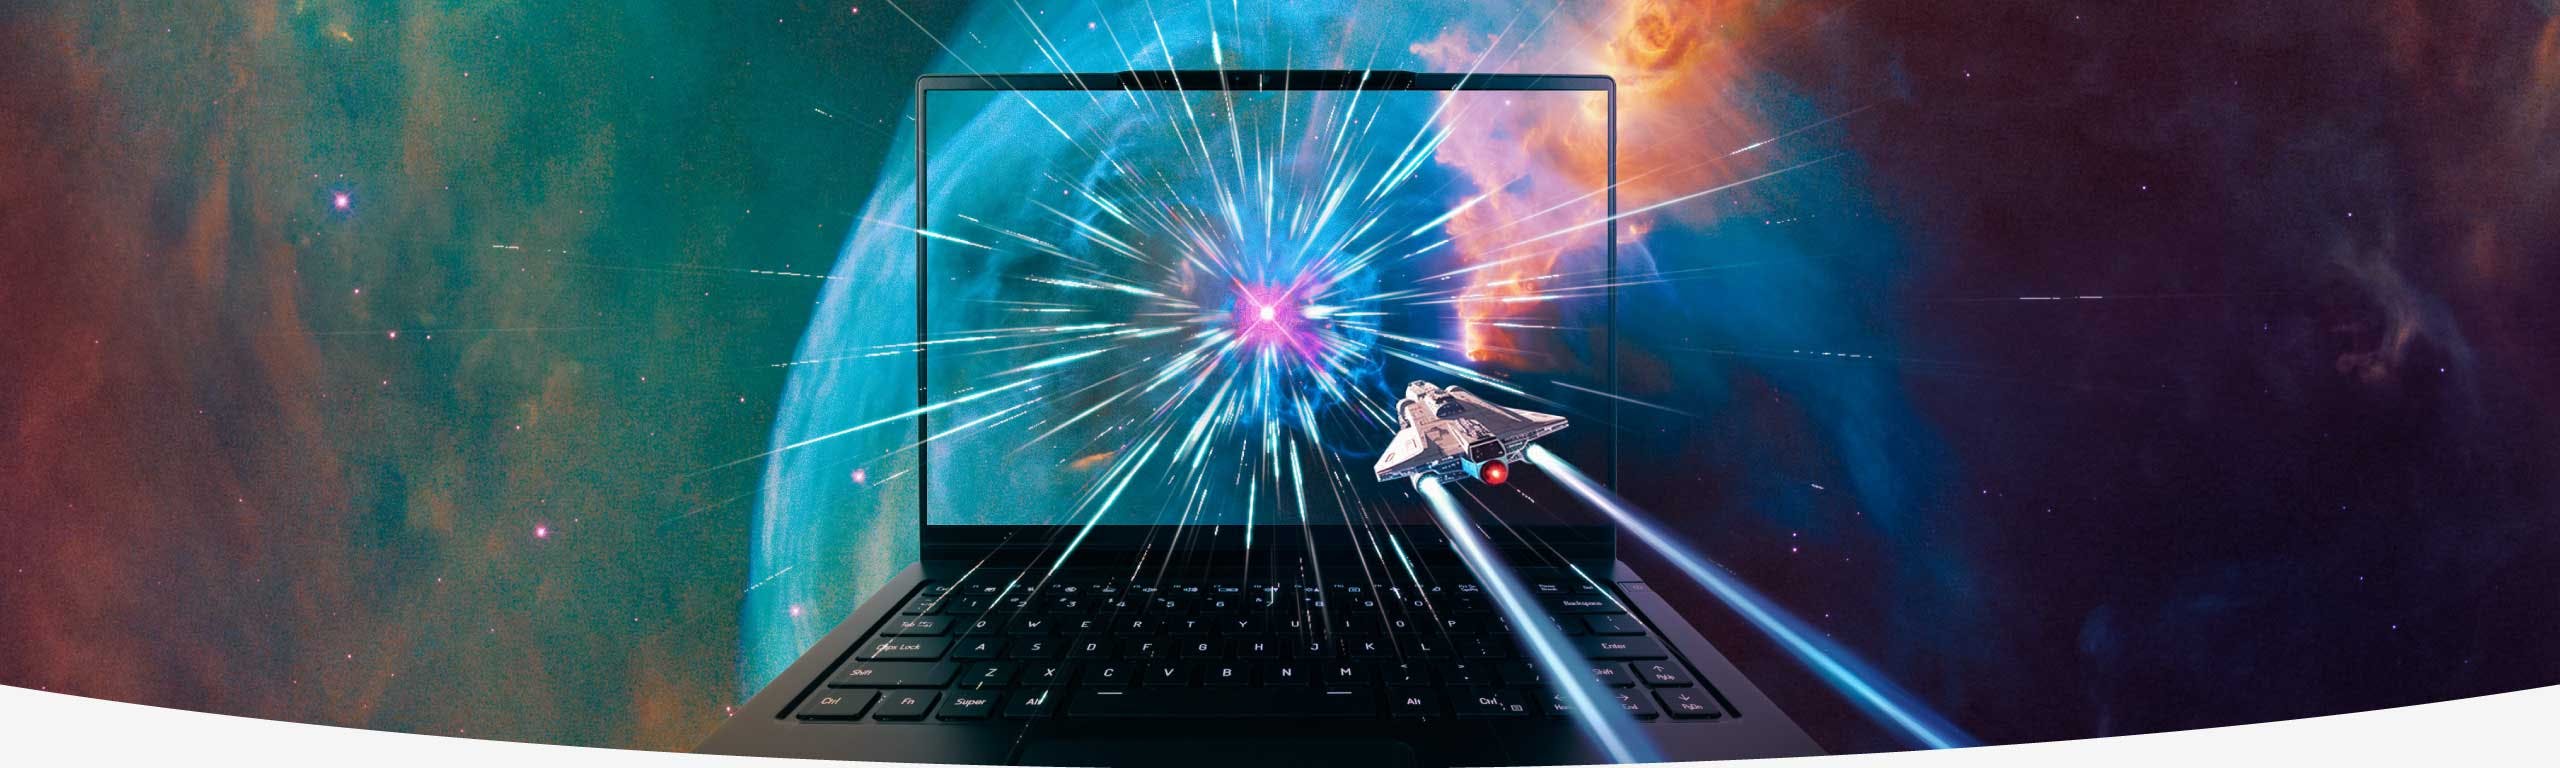 New Lemur Pro in space with spaceship in hyper speed towards a distant star in its monitor